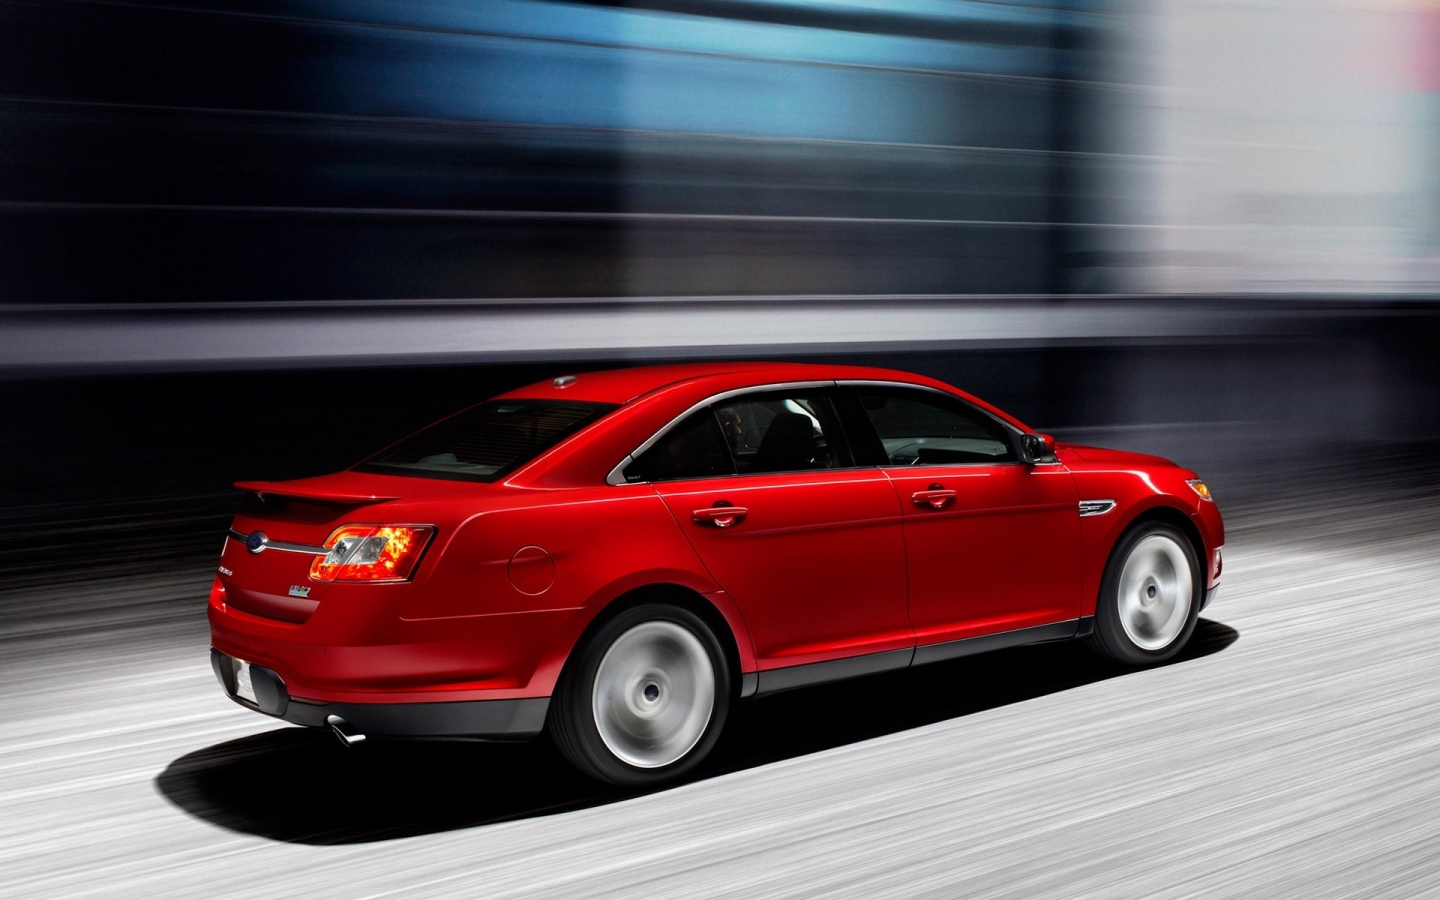 Ford Taurus SHO 2010 for 1440 x 900 widescreen resolution